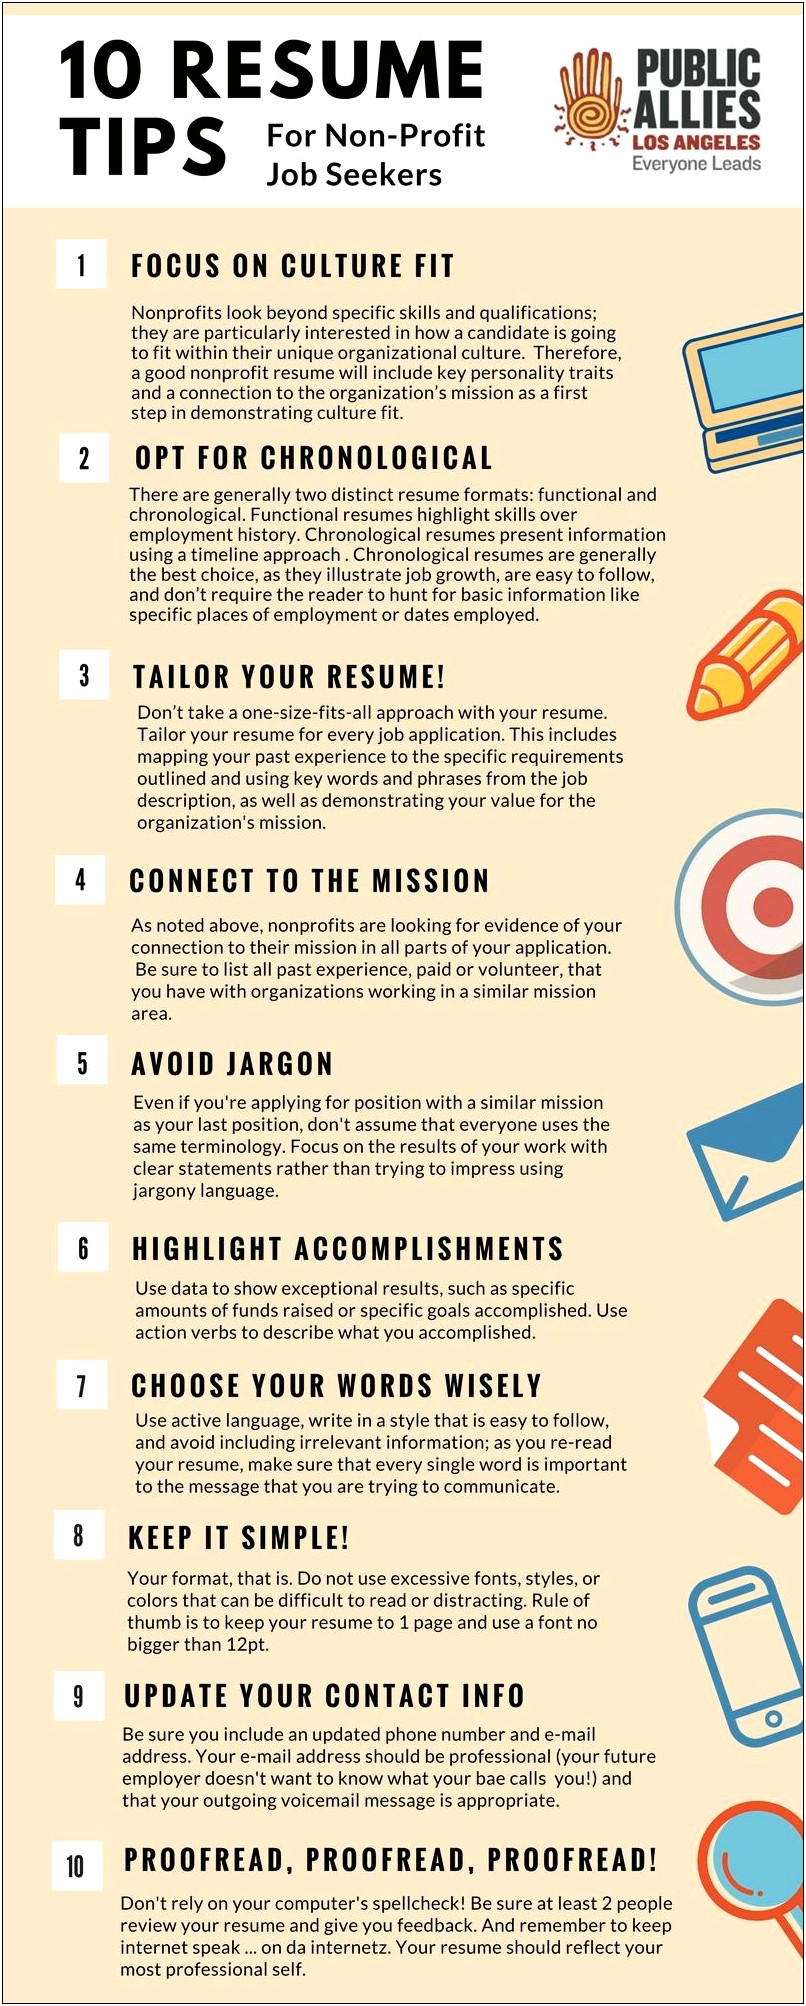 10 Words To Avoid In A Resume